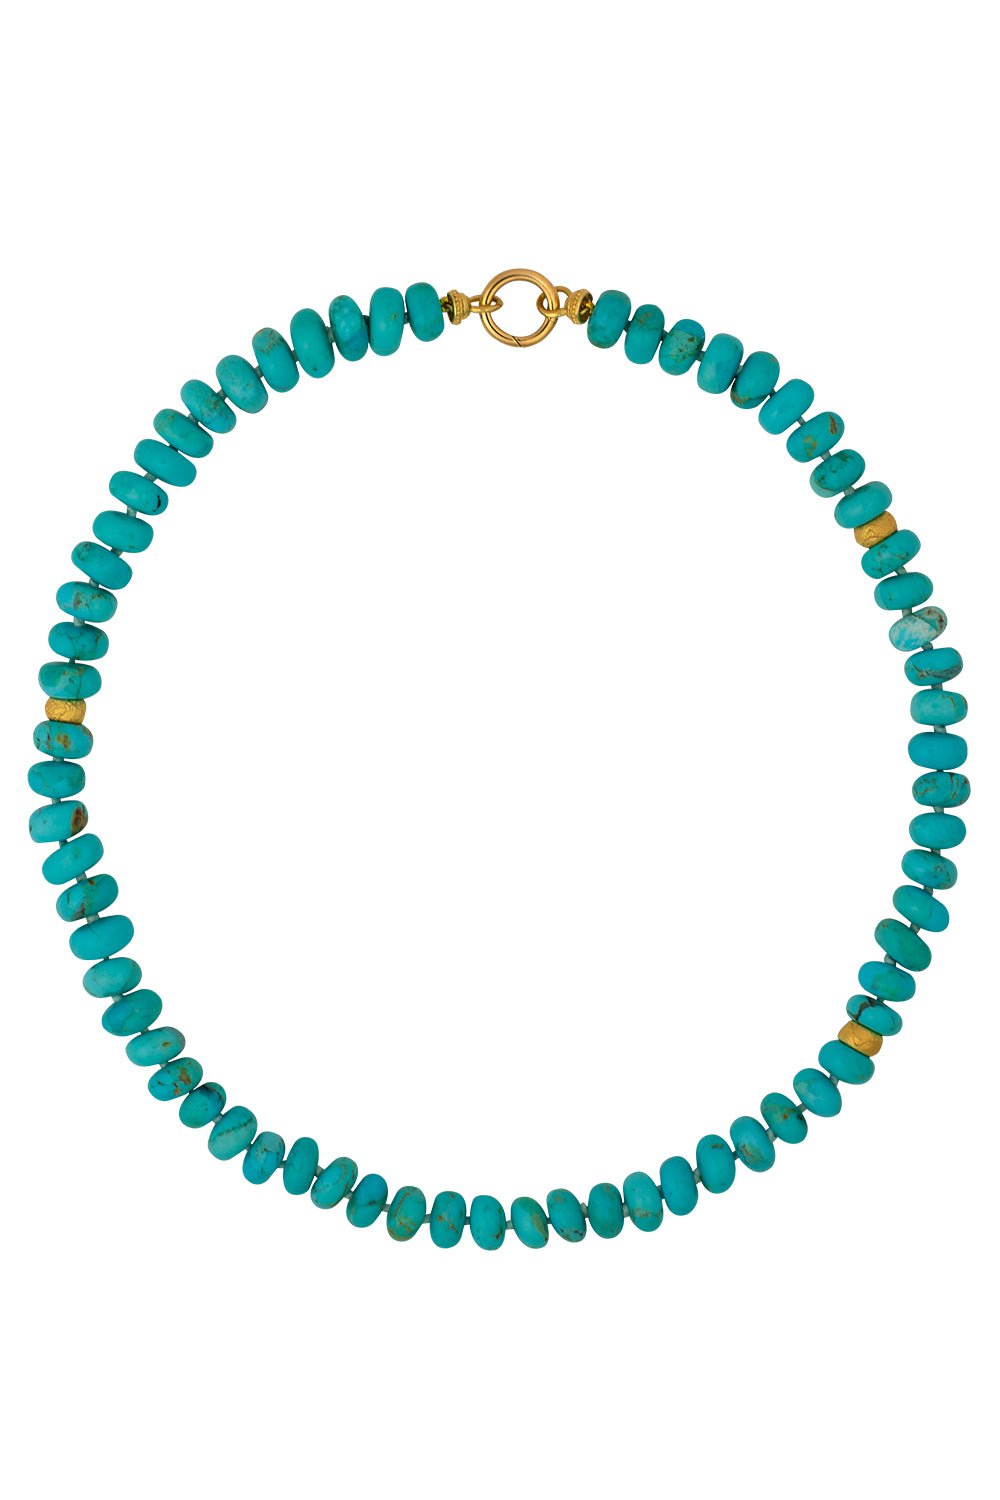 TANYA FARAH-Turqoise Beaded Charm Catcher Necklace-YELLOW GOLD